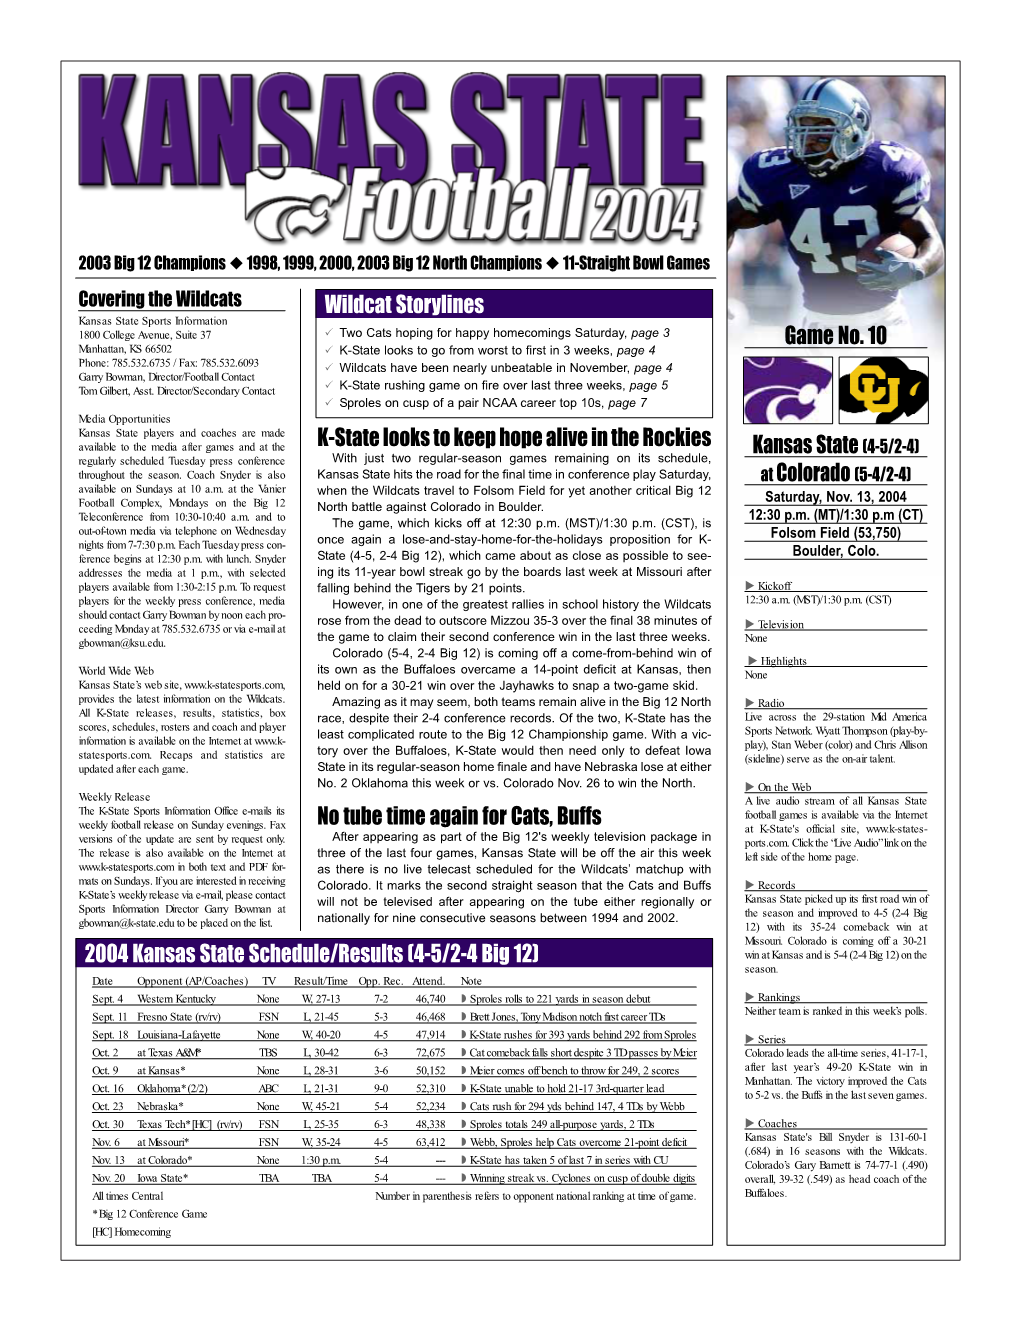 K-State Looks to Keep Hope Alive in the Rockies No Tube Time Again for Cats, Buffs 2004 Kansas State Schedule/Results (4-5/2-4 B